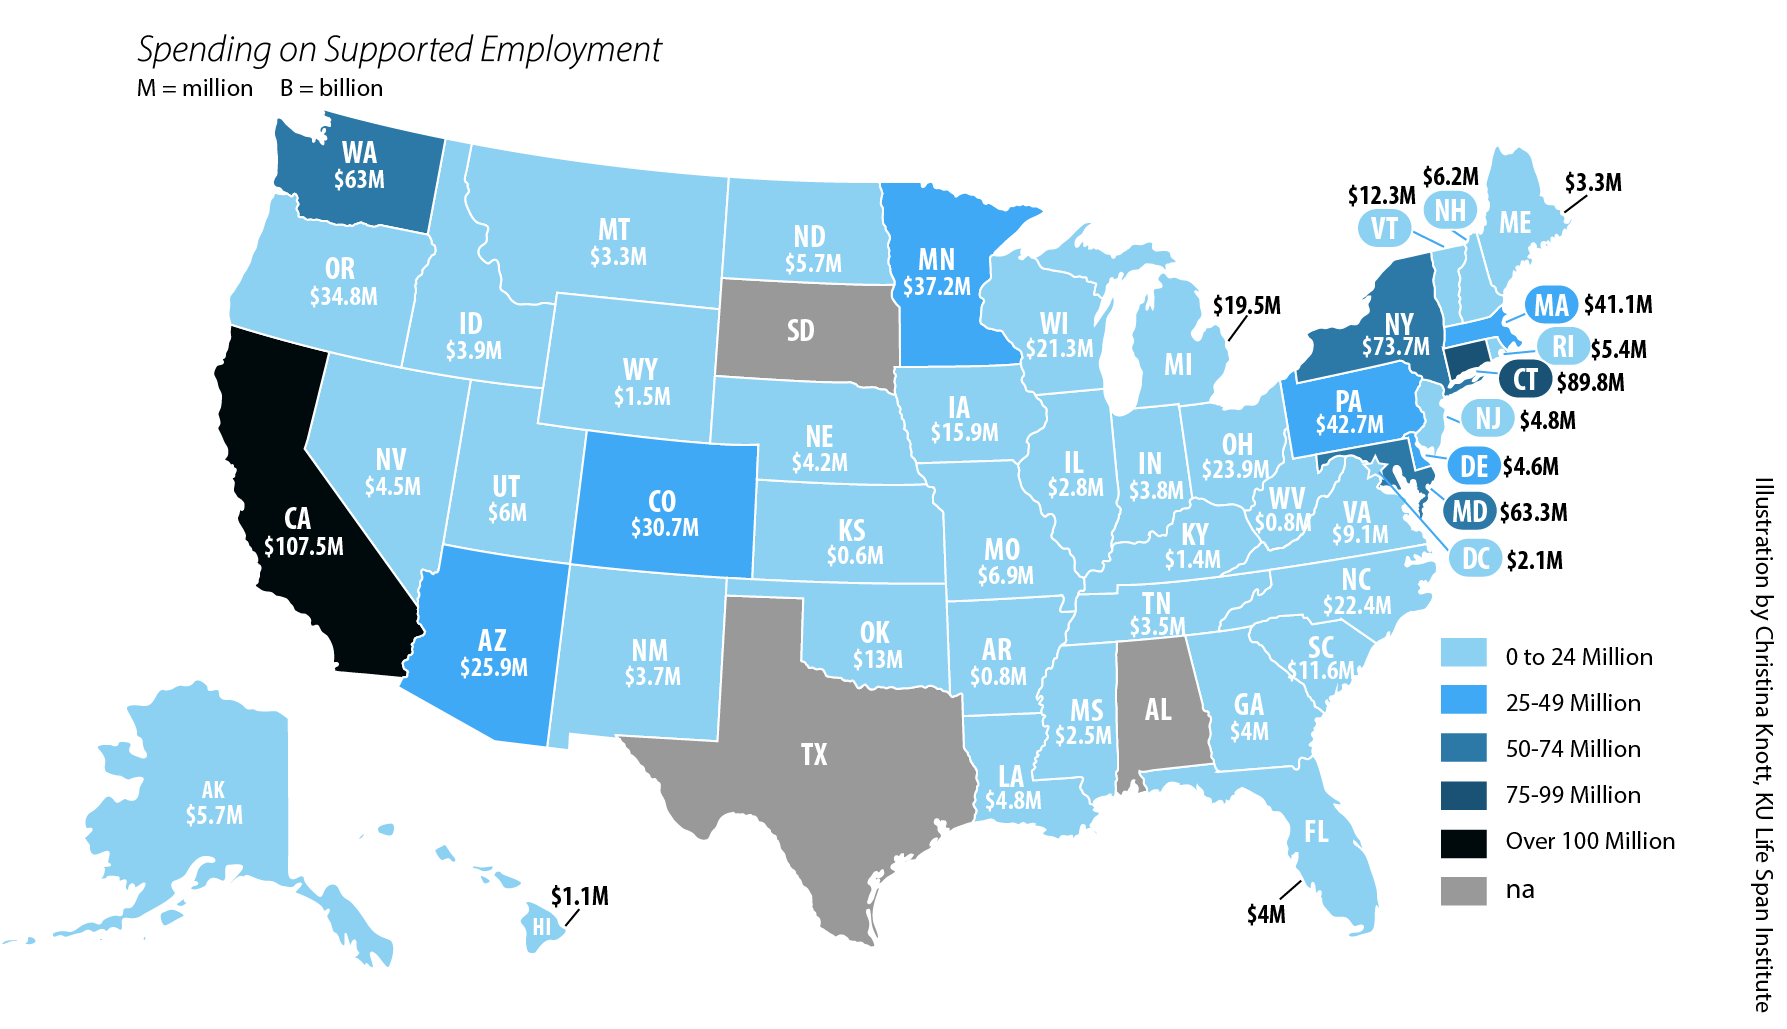 U.S. map showing spending on supported employment